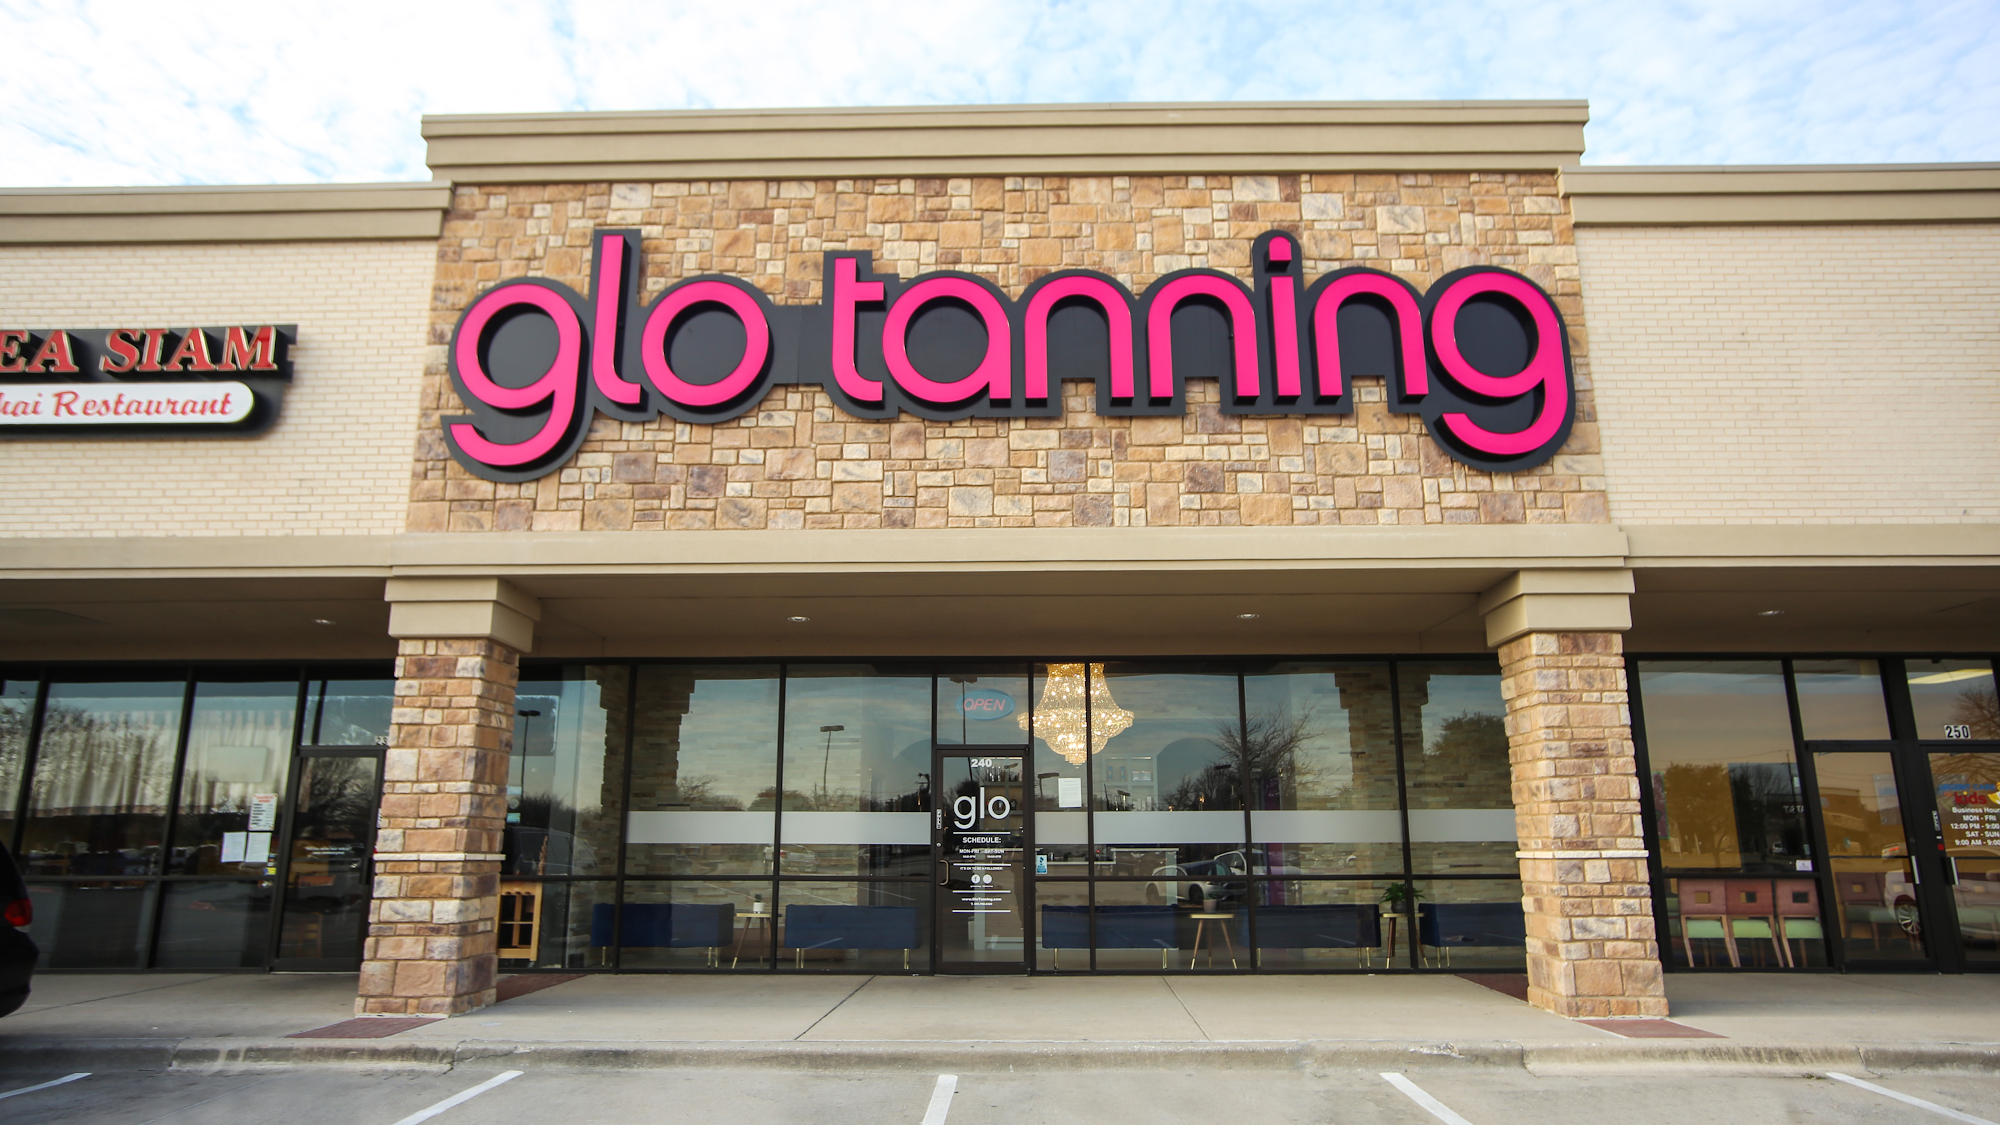 Glo Tanning - Luxury Tanning Salons and Day Spas